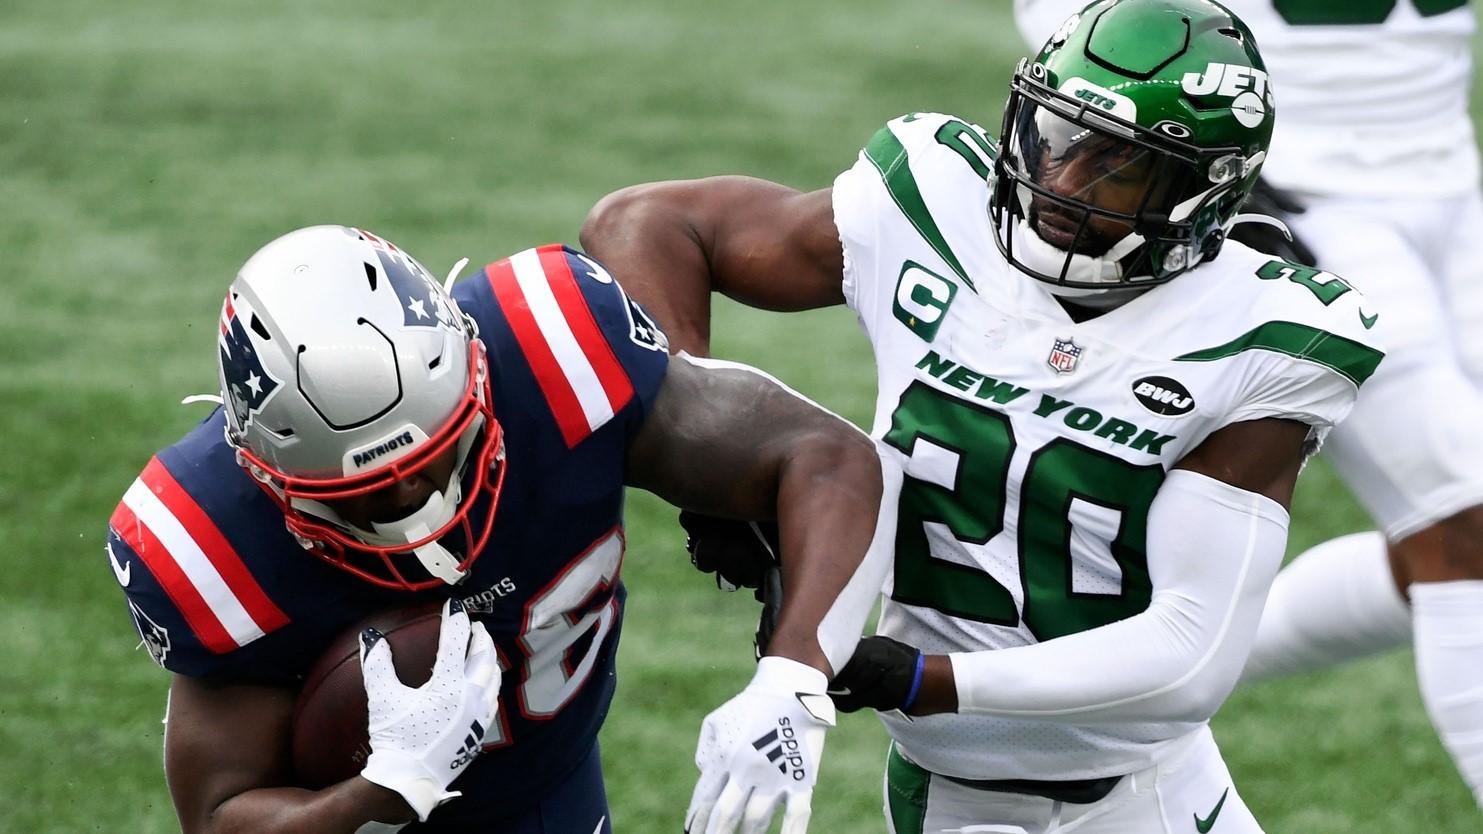 Jan 3, 2021; Foxborough, Massachusetts, USA; New England Patriots running back Sony Michel (26) rushes against New York Jets free safety Marcus Maye (20) during the first quarter at Gillette Stadium. / Brian Fluharty-USA TODAY Sports